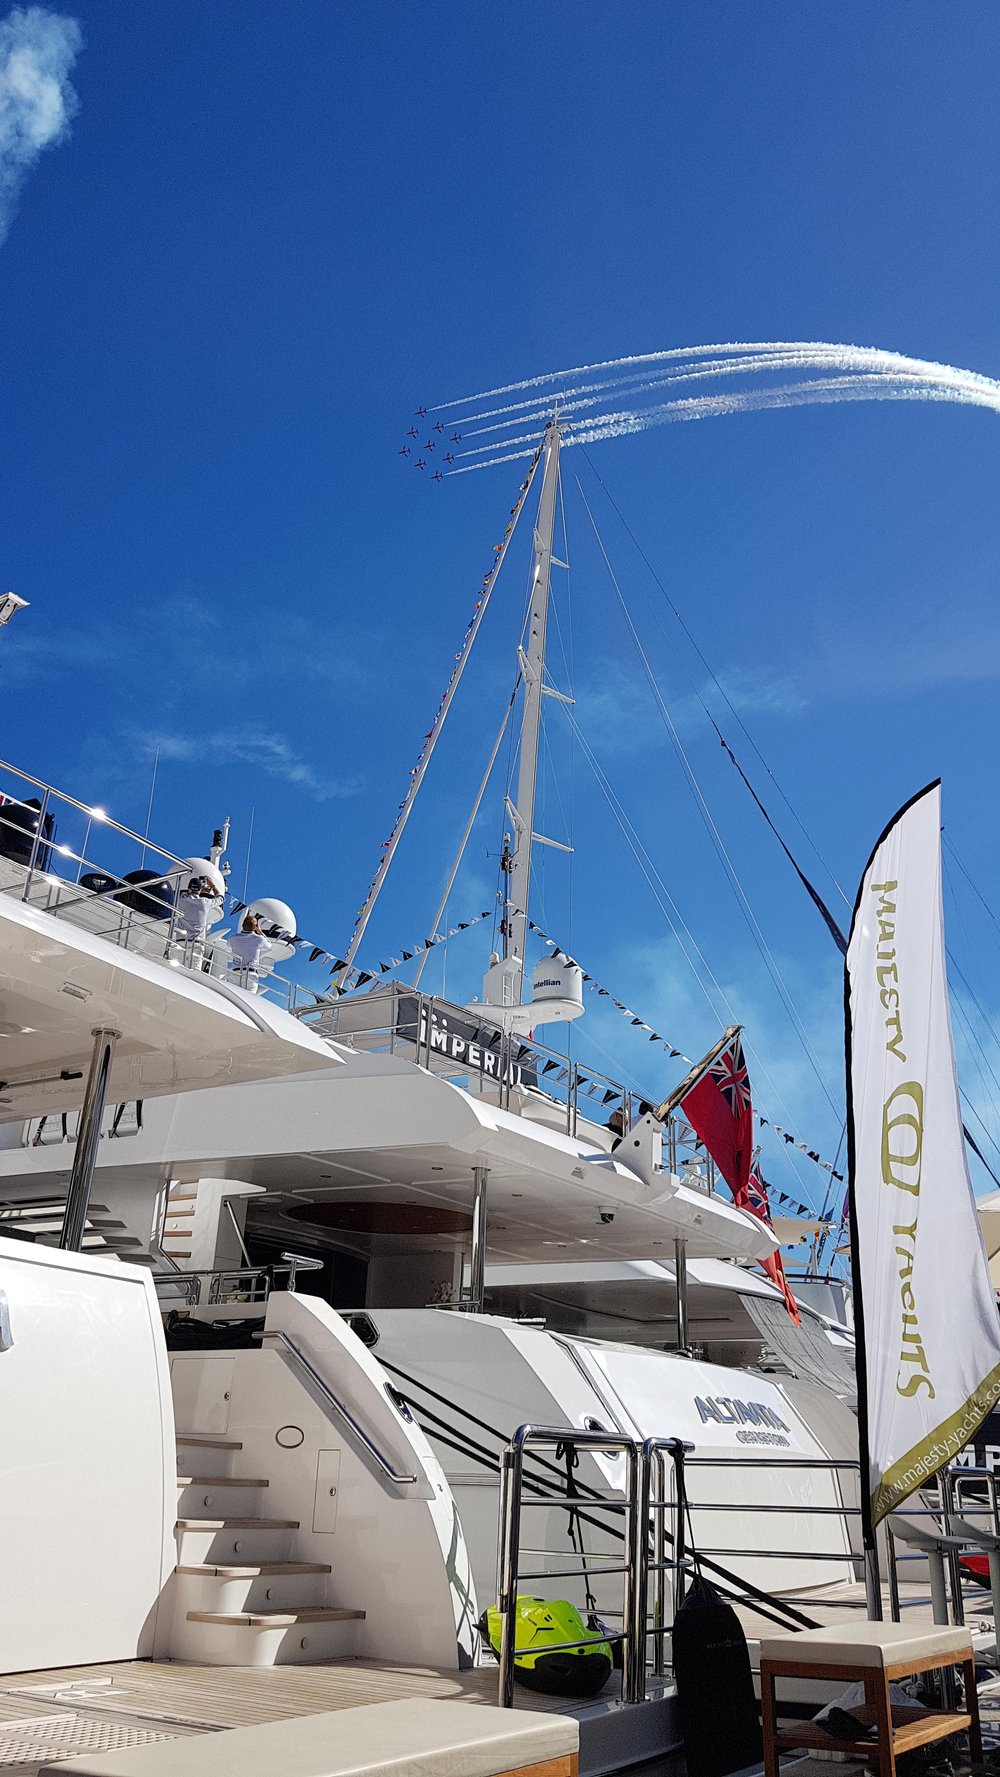 Gulf Craft at the 2018 Monaco Yacht Show-Day 2